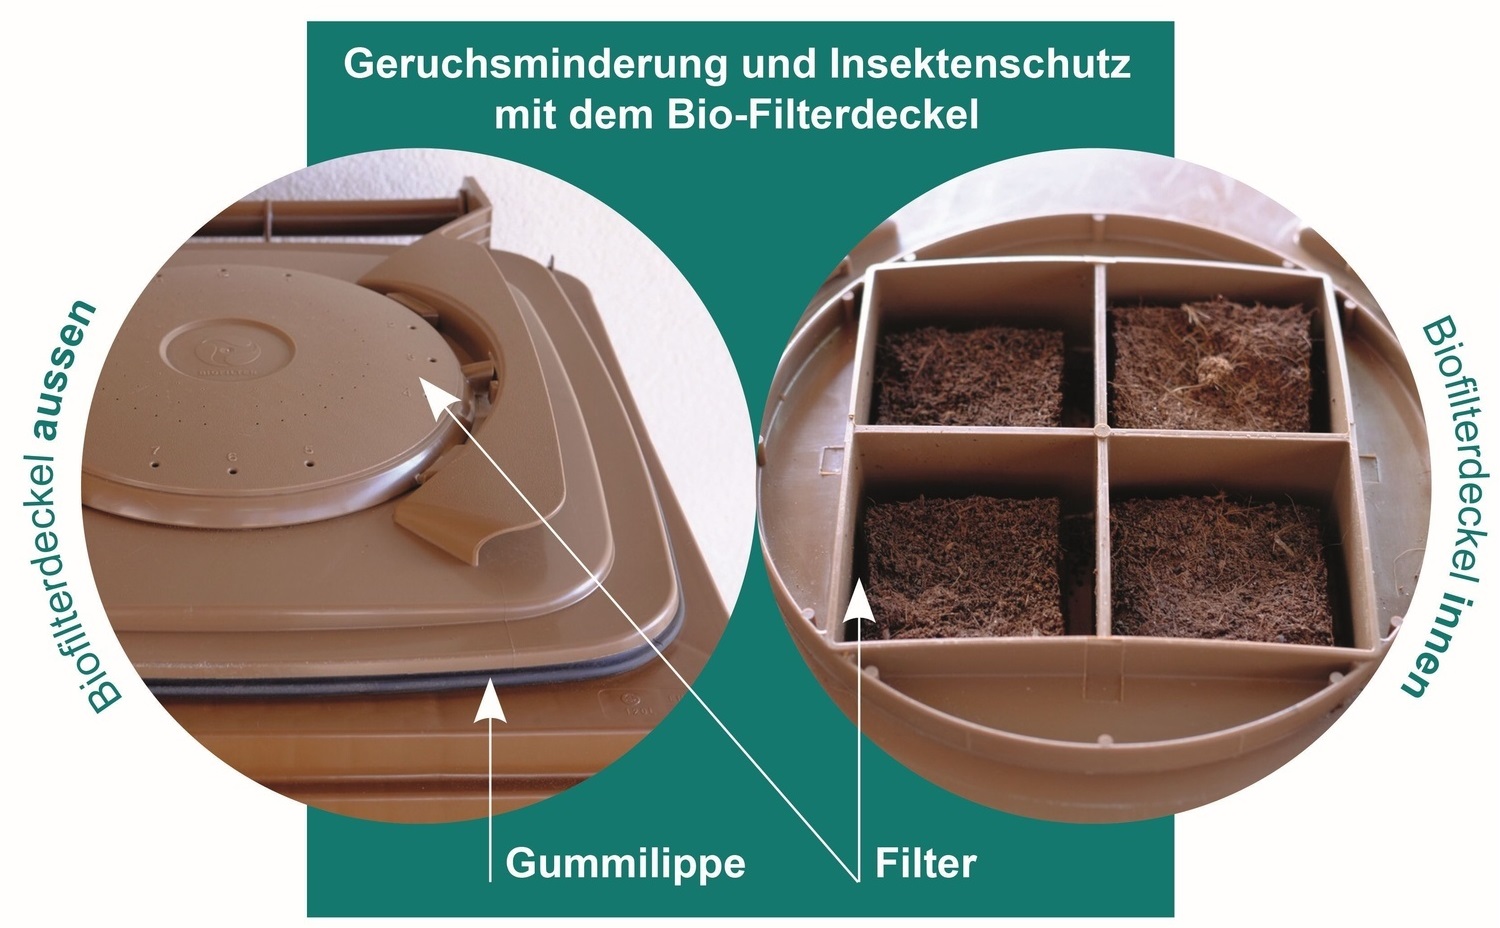 Organic wastebins with and without filter lid in comparison